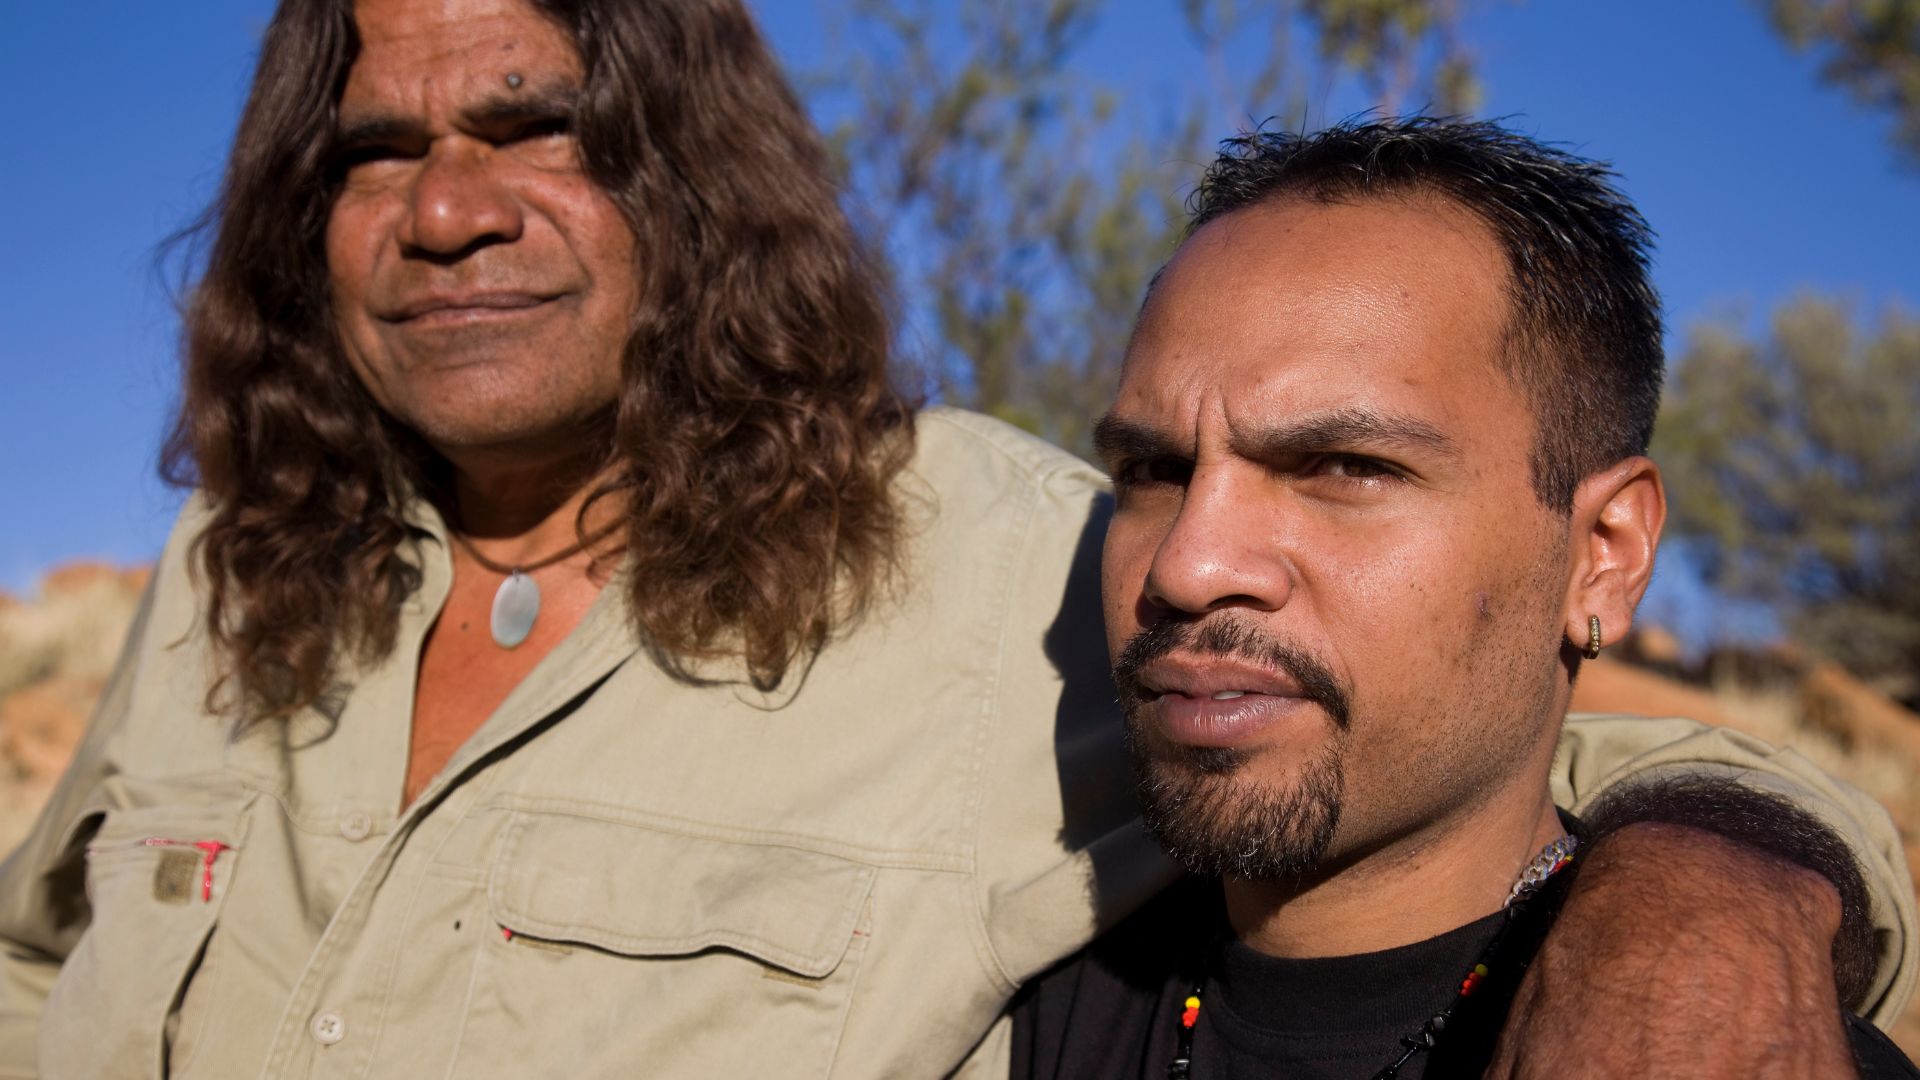 First Nations people in rural NSW felt more anxiety about COVID-19 than non-First Nations people